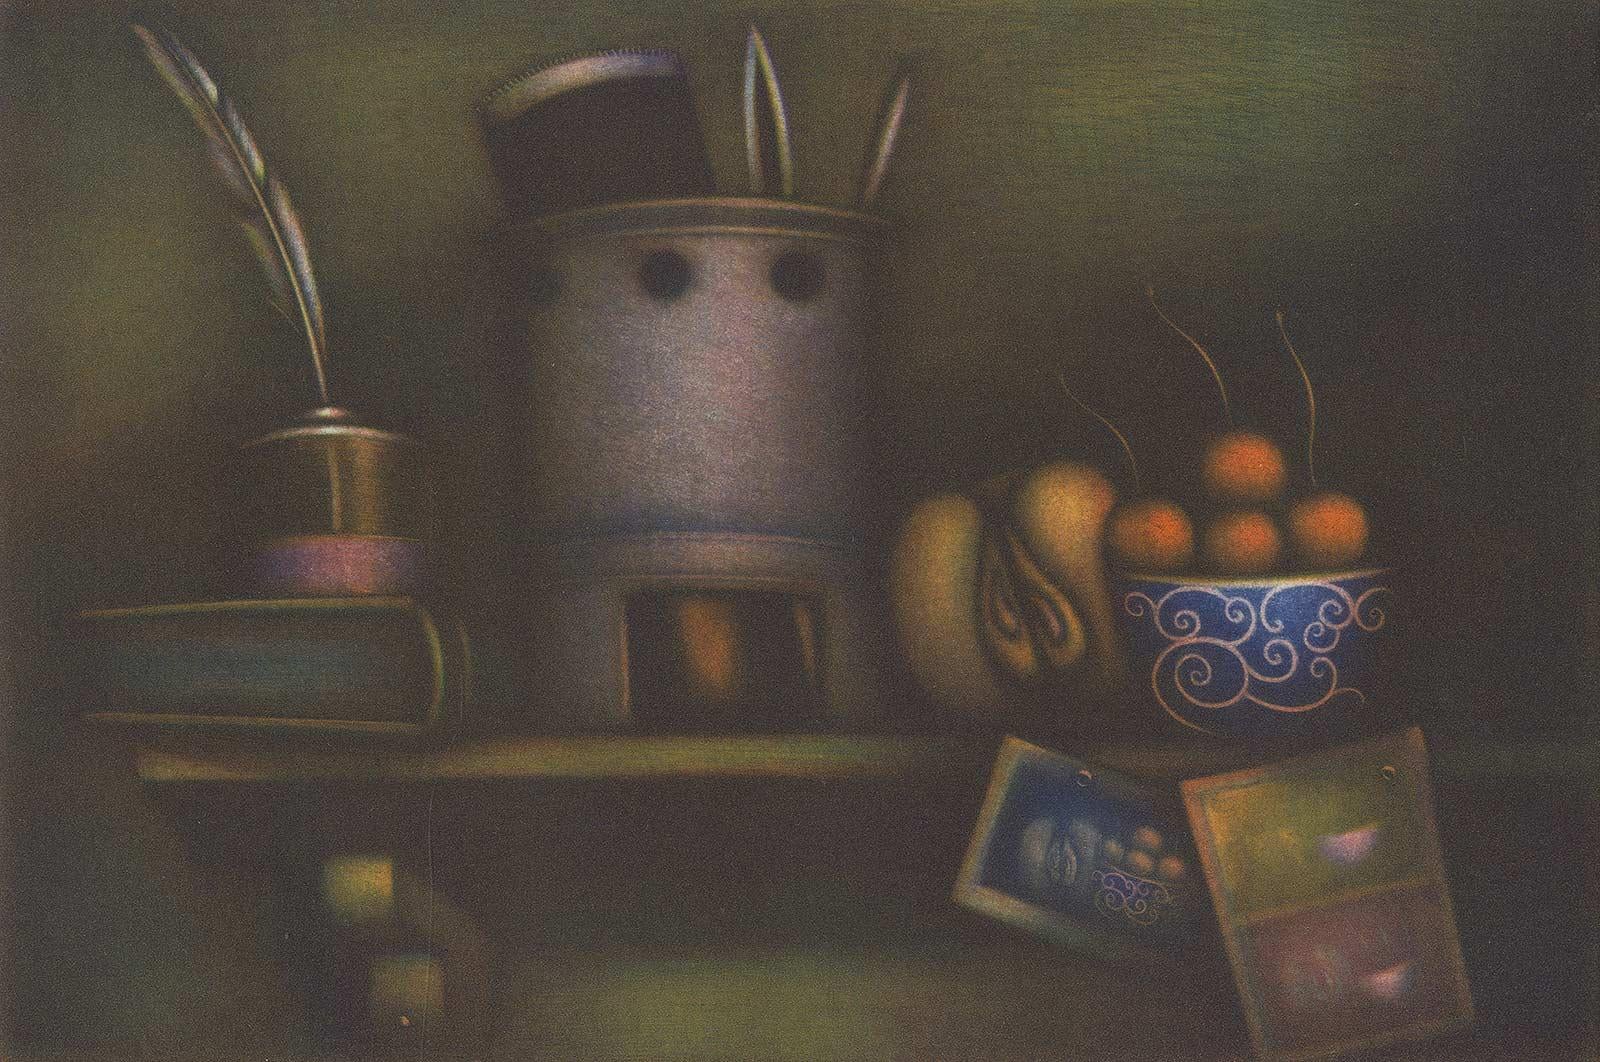 Laurent Schkolnyk Still-Life Print - Homage to Le Blon (In the 18th C, Le Bon invented a 3-4 color printing method)